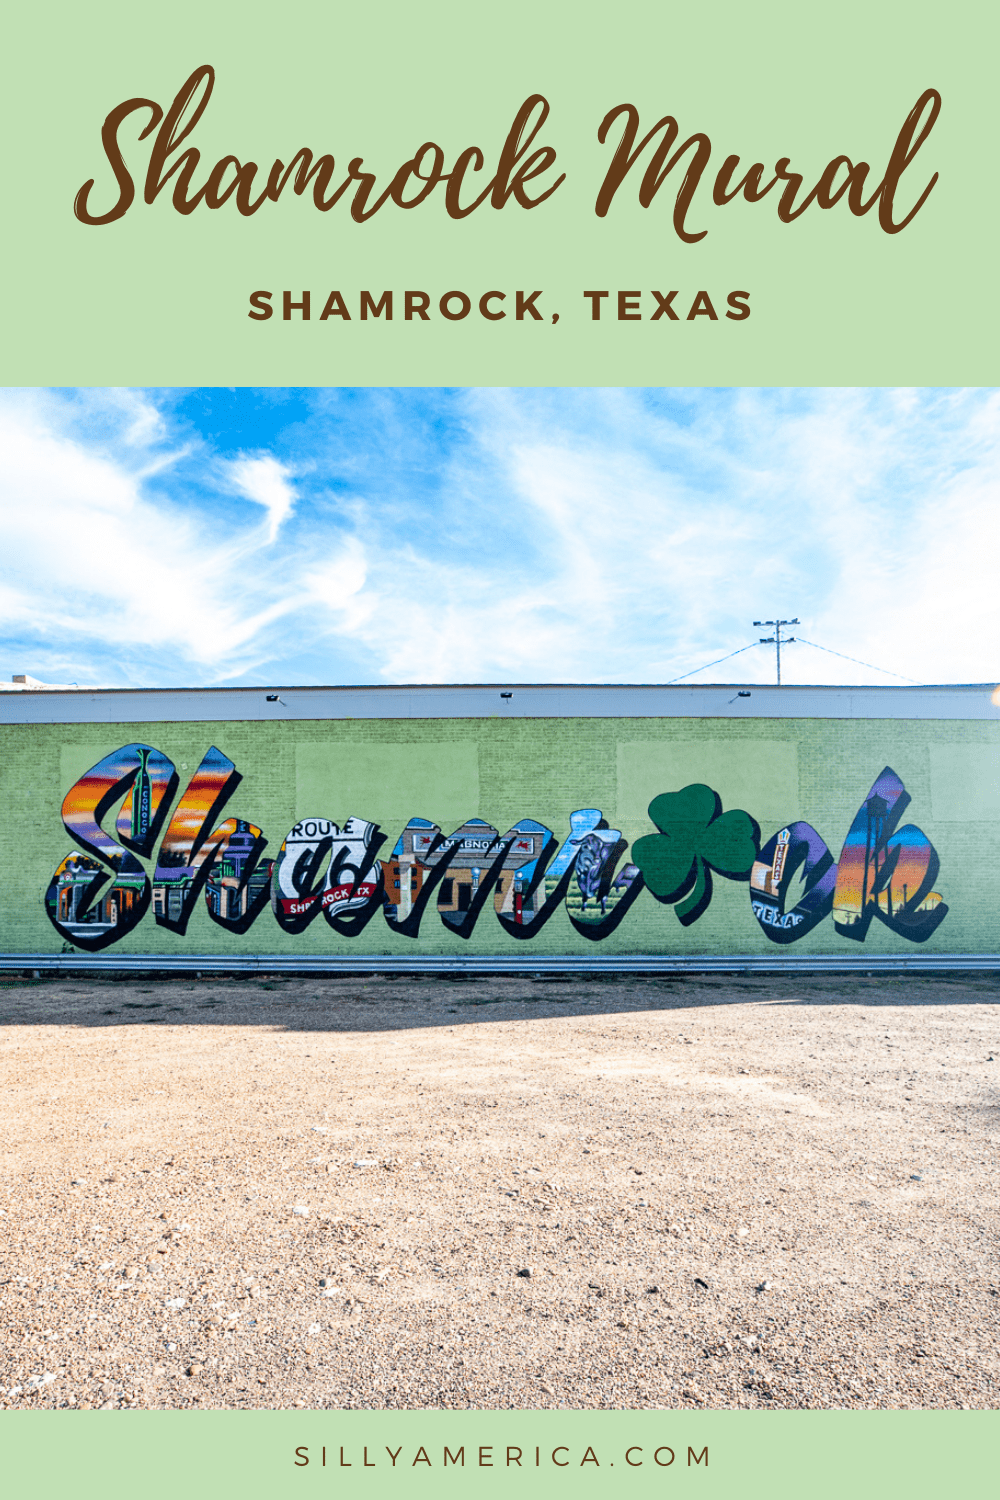 Shamrock, Texas is known for its Irish roots and place on Route 66. A new Shamrock, Texas Mural celebrates all the best the town has to offer.  #RoadTrips #RoadTripStop #Route66 #Route66RoadTrip #TexasRoute66 #Texas #TexasRoadTrip #TexasRoadsideAttractions #RoadsideAttractions #RoadsideAttraction #RoadsideAmerica #RoadTrip 